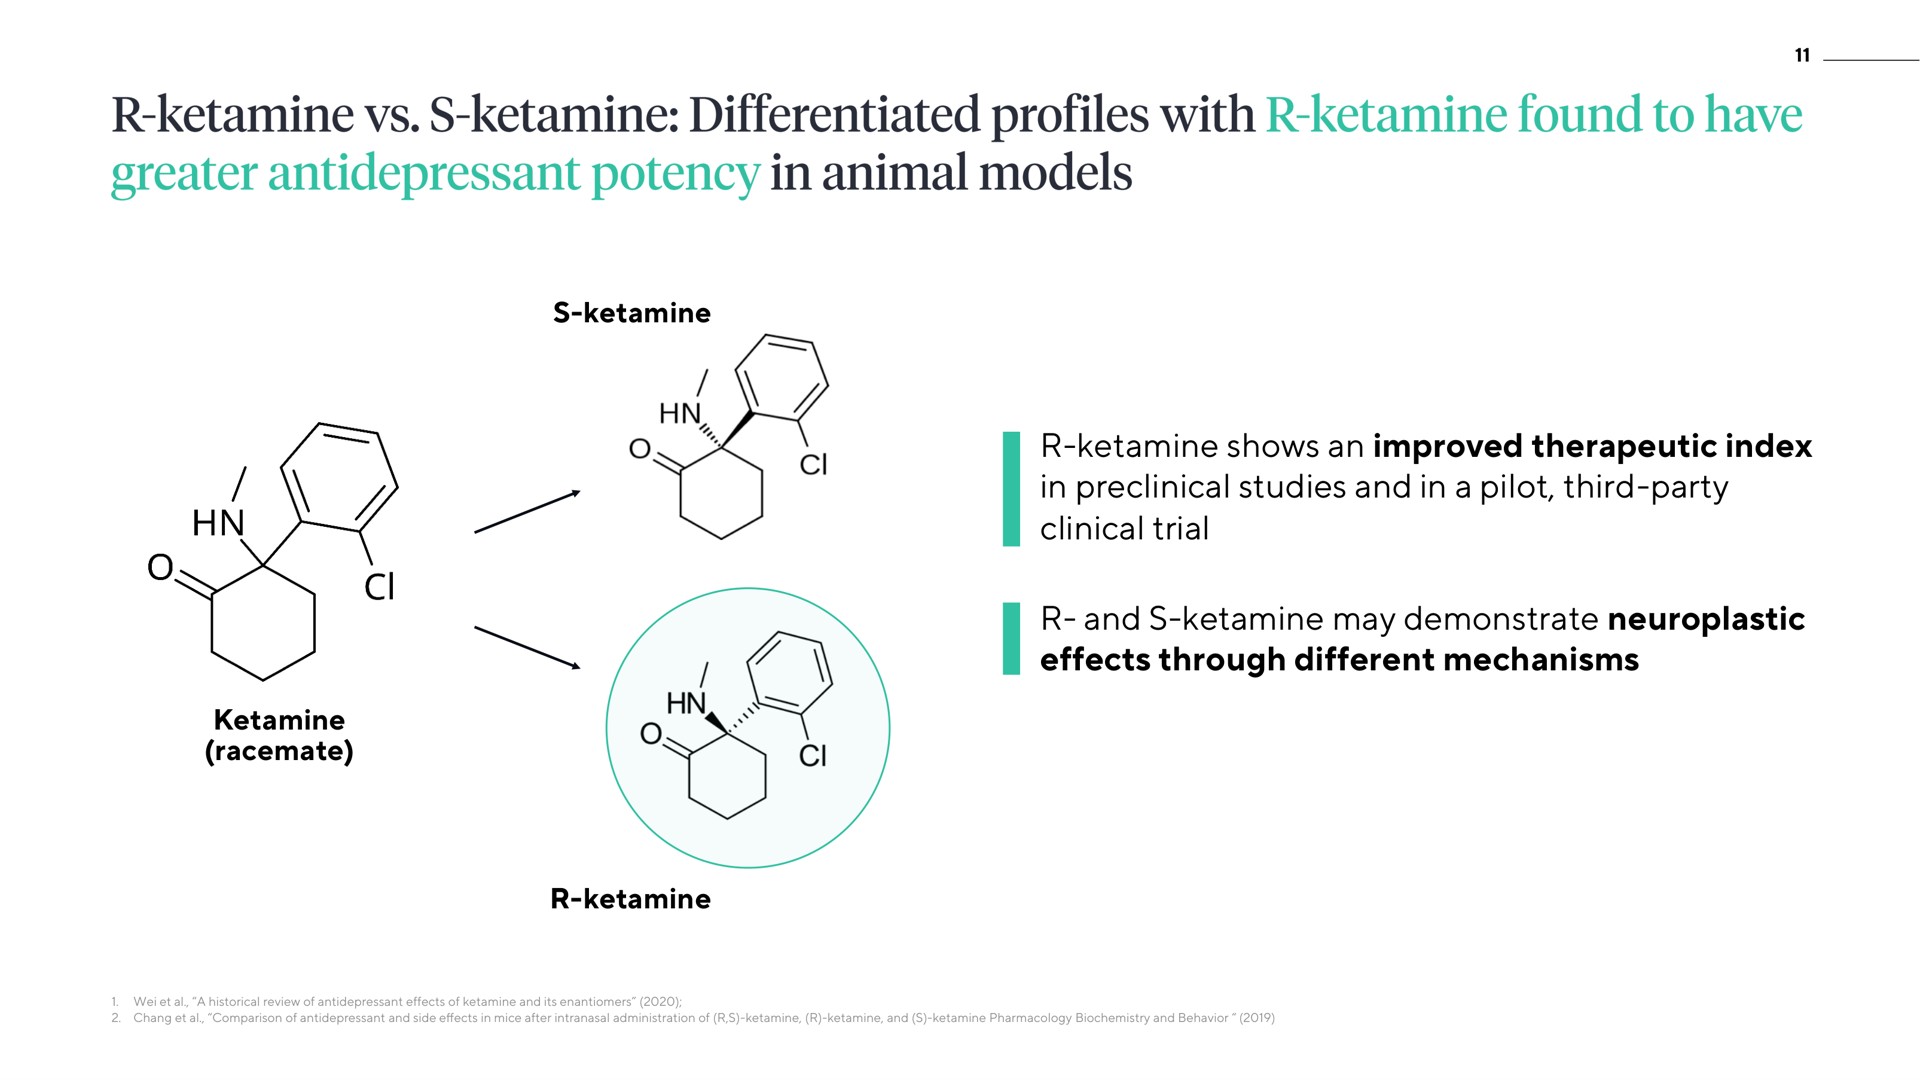 shows an improved therapeutic index in preclinical studies and in a pilot third party clinical trial and may demonstrate effects through different mechanisms racemate differentiated profiles with found to have greater potency animal models | ATAI